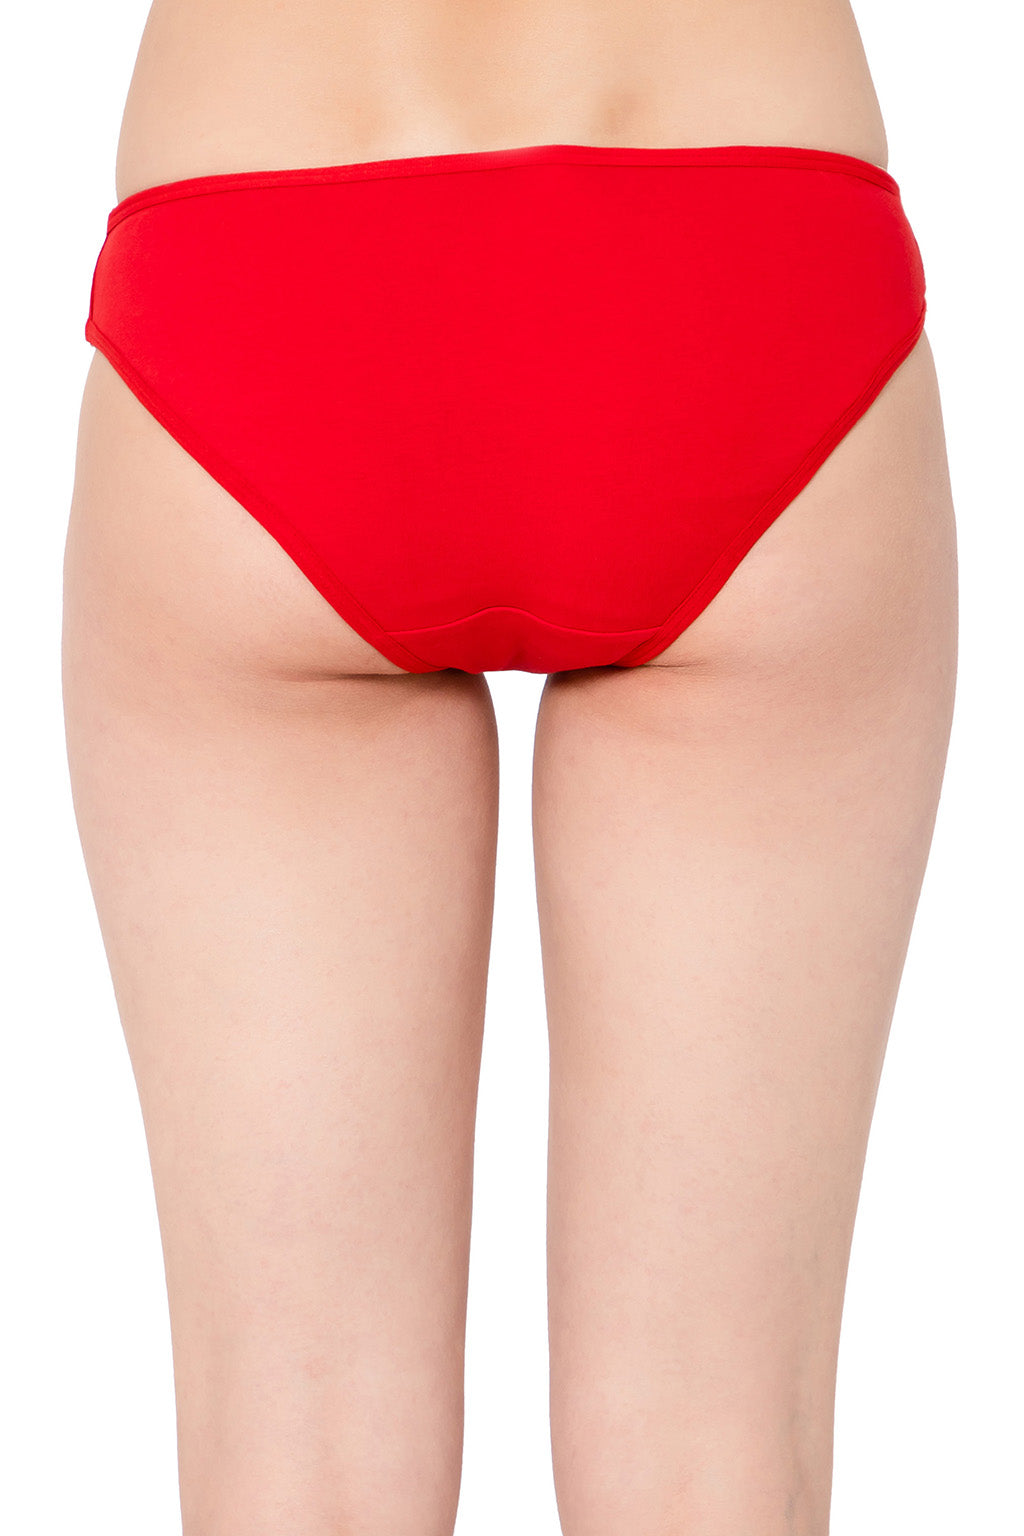 Low Waist Bikini Panty in Red with Cage Sides - Cotton – Tradyl